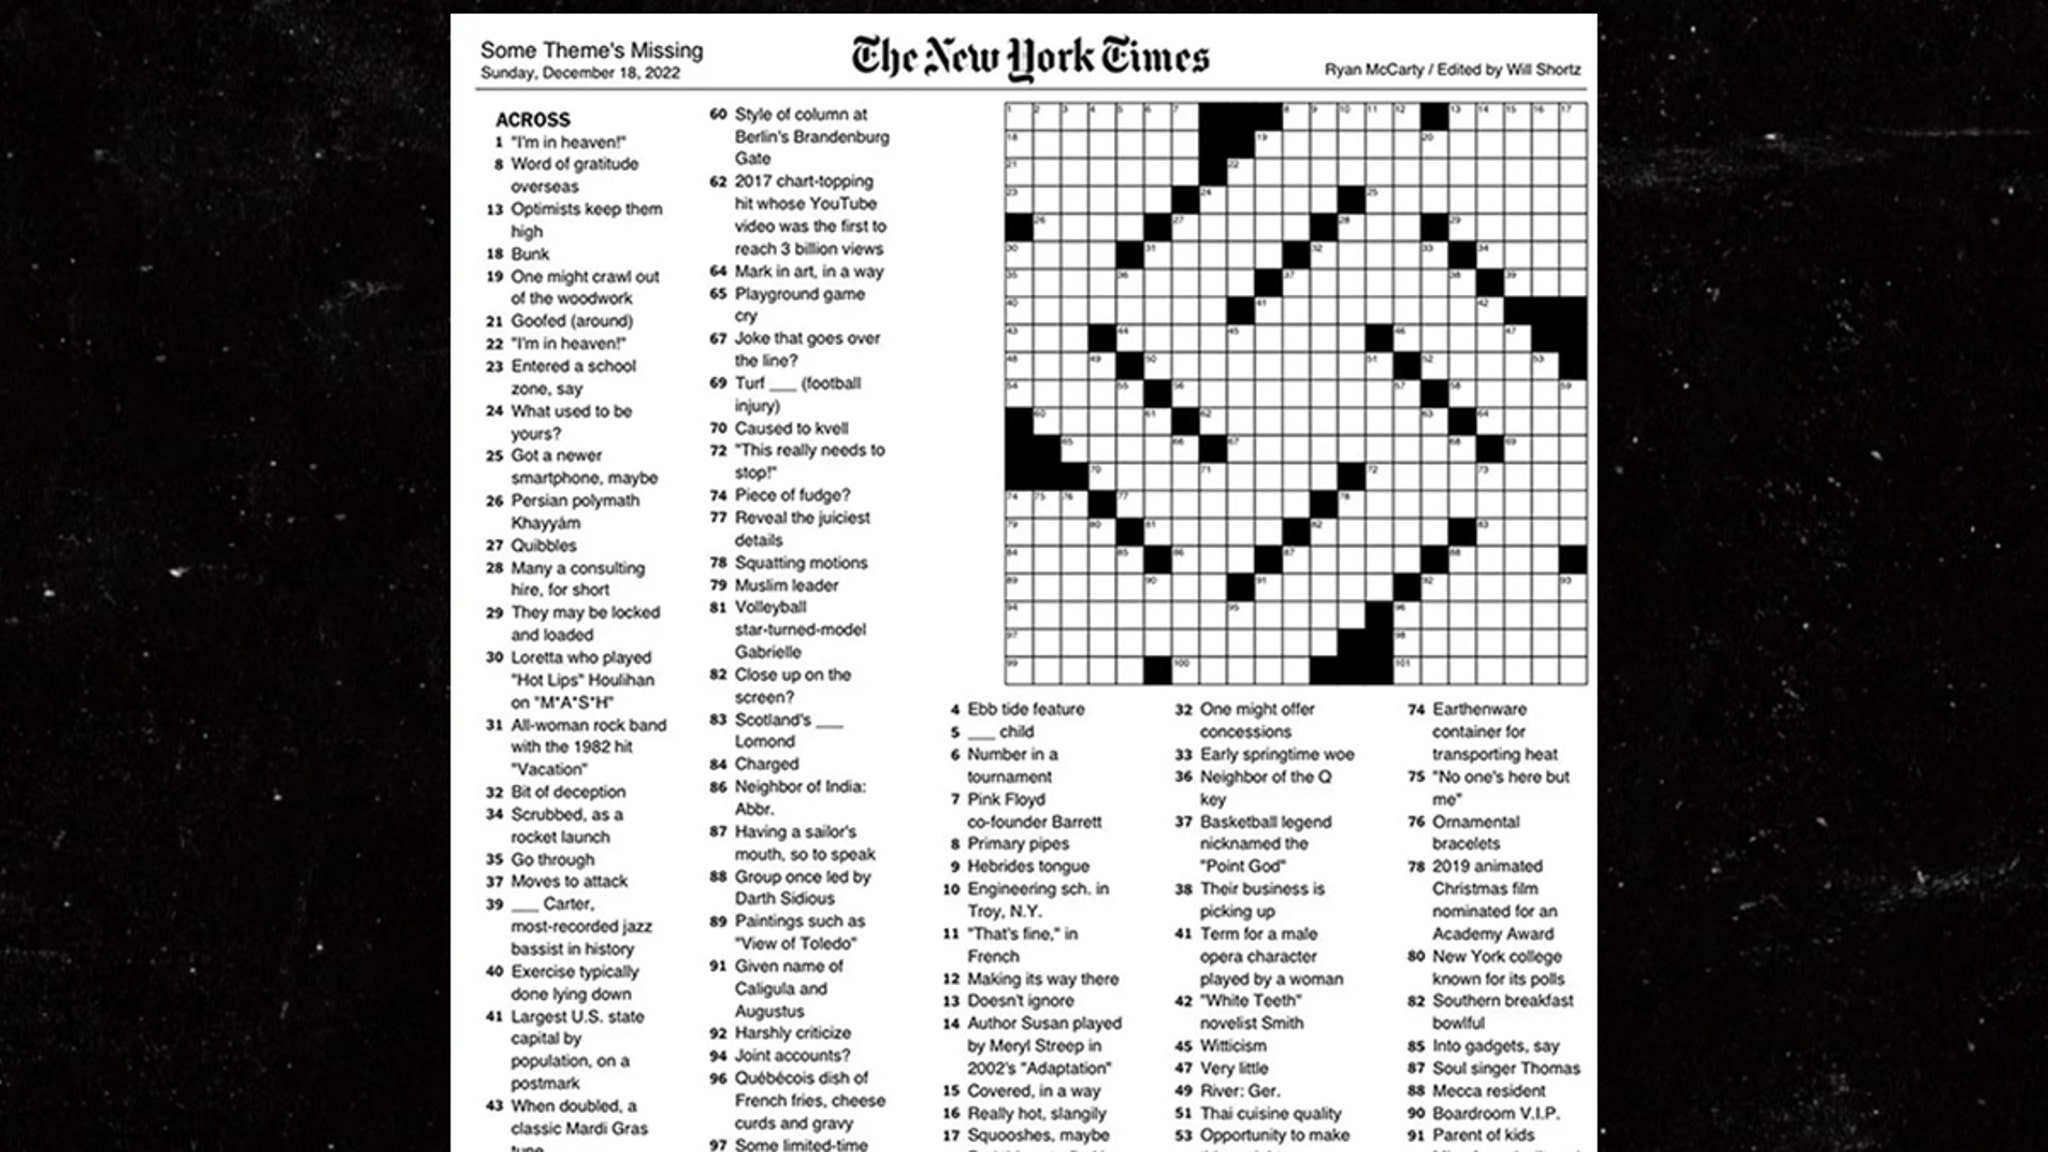 New York Times Dragged After Crossword'S Swastika Shape During Hanukkah